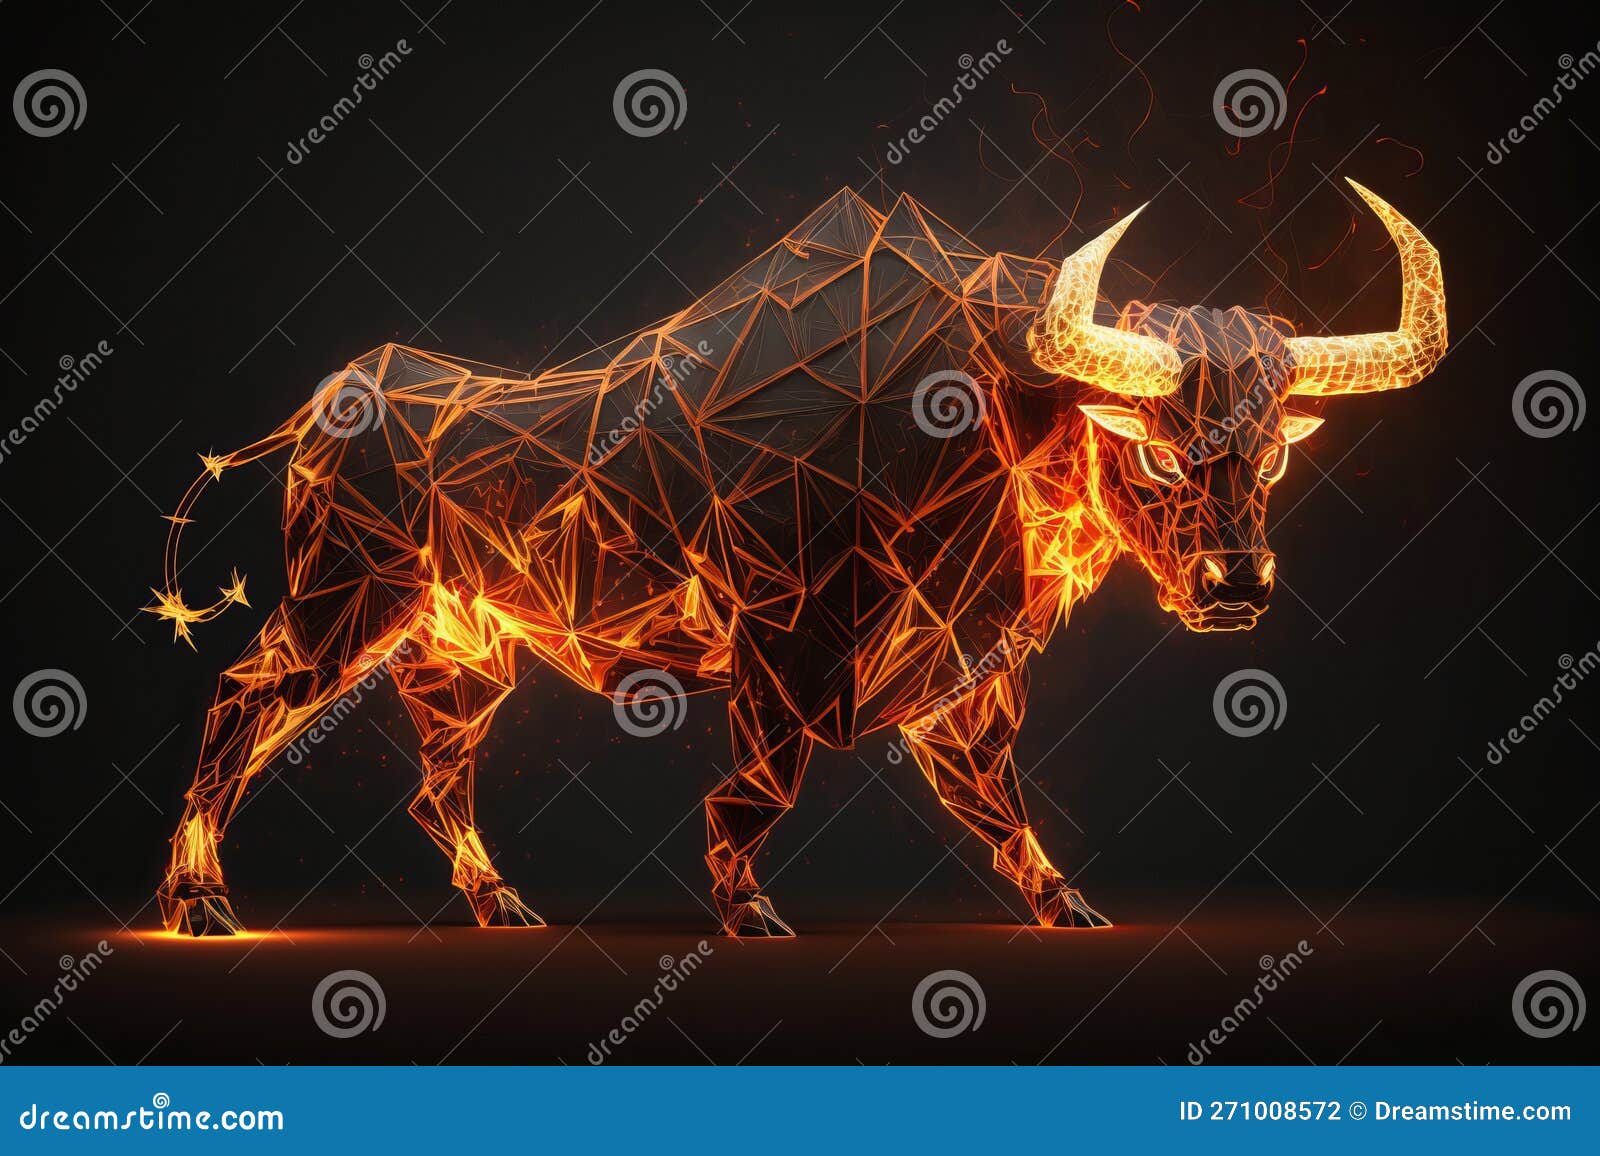 Fire Sculpture of a Bull, Bullish in Stock Market and Crypto Currency ...